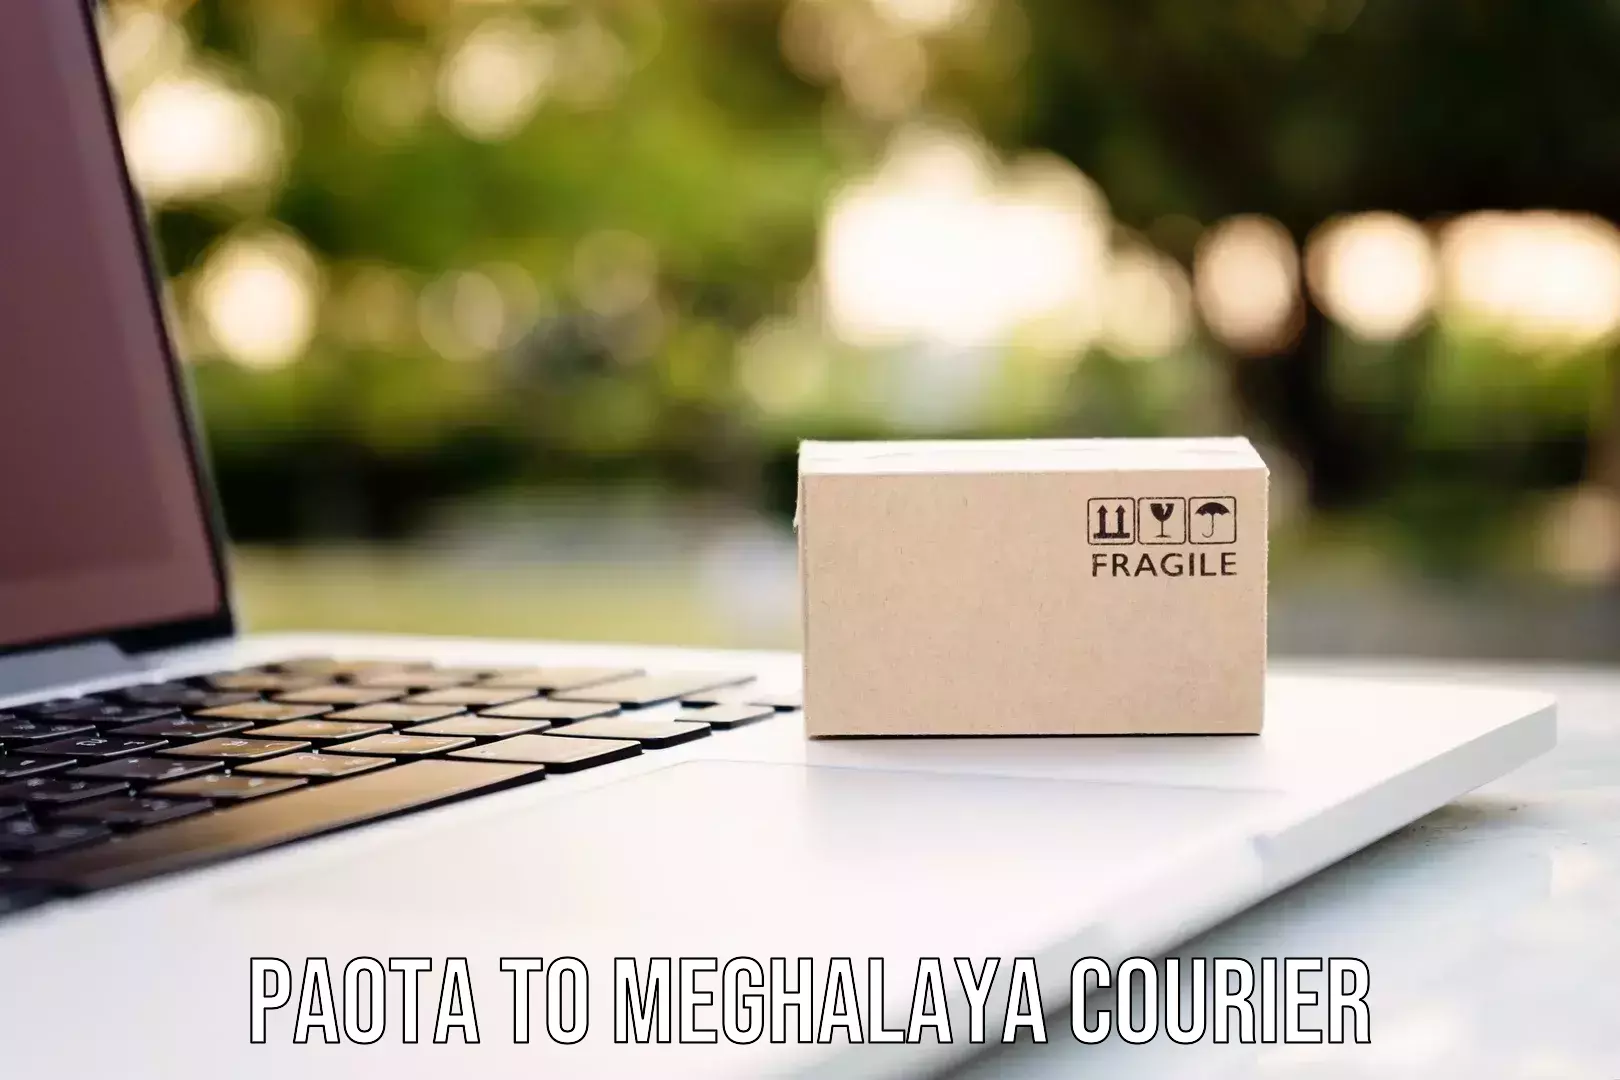 Customer-friendly courier services Paota to Meghalaya